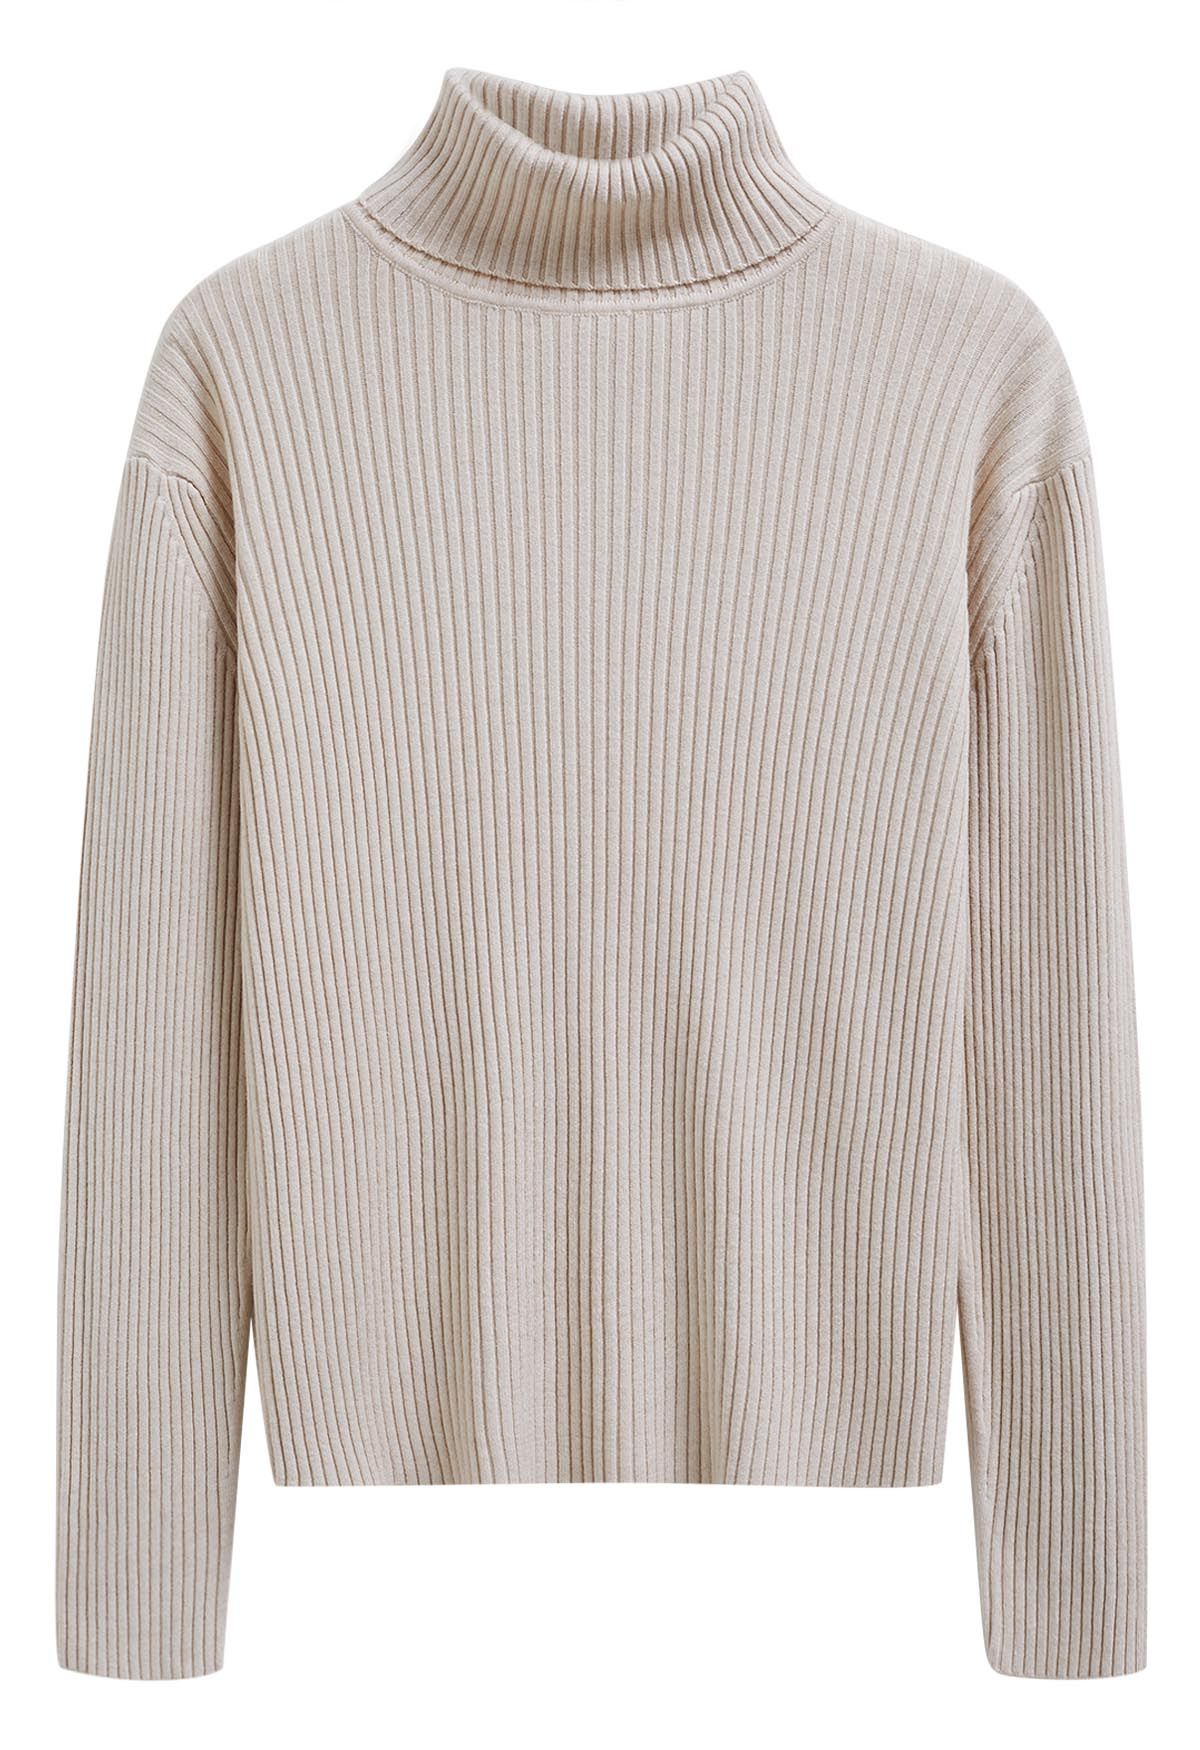 Versatile Turtleneck Ribbed Knit Sweater in Oatmeal